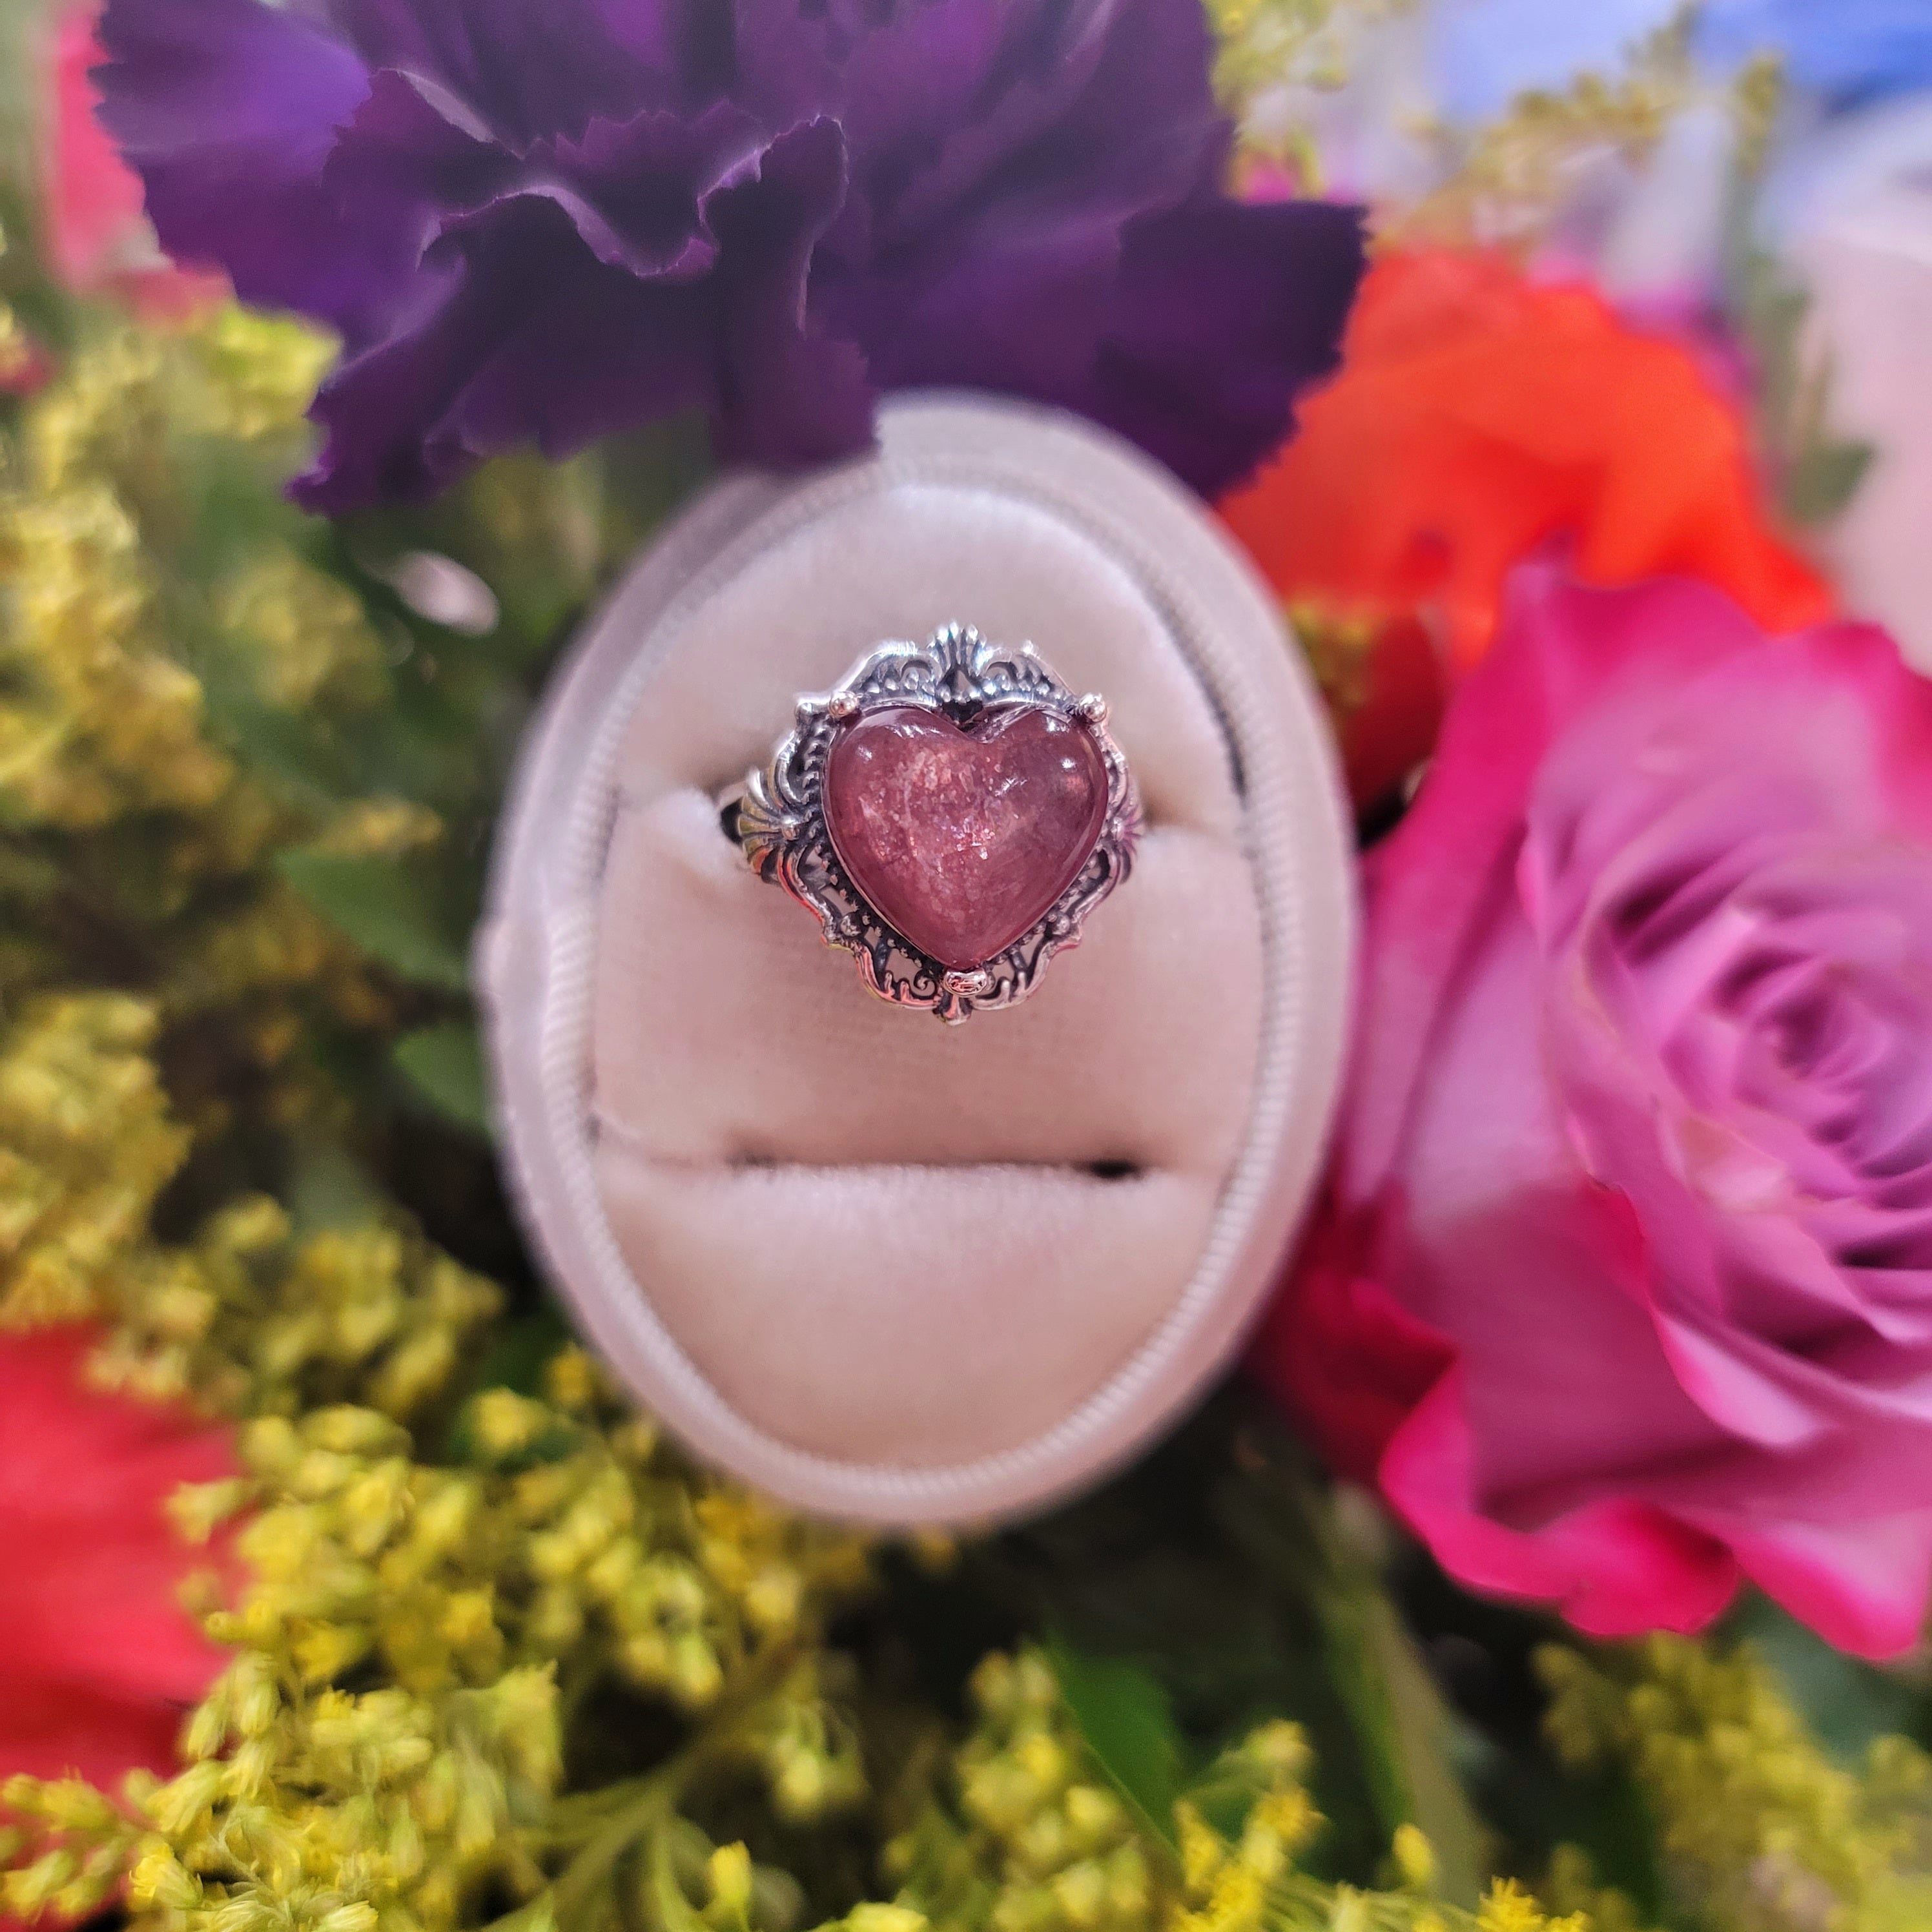 Gem Lepidolite Vintage Style Heart Adjustable Ring .925 Silver for Anxiety Support, Joy and Stress Relief